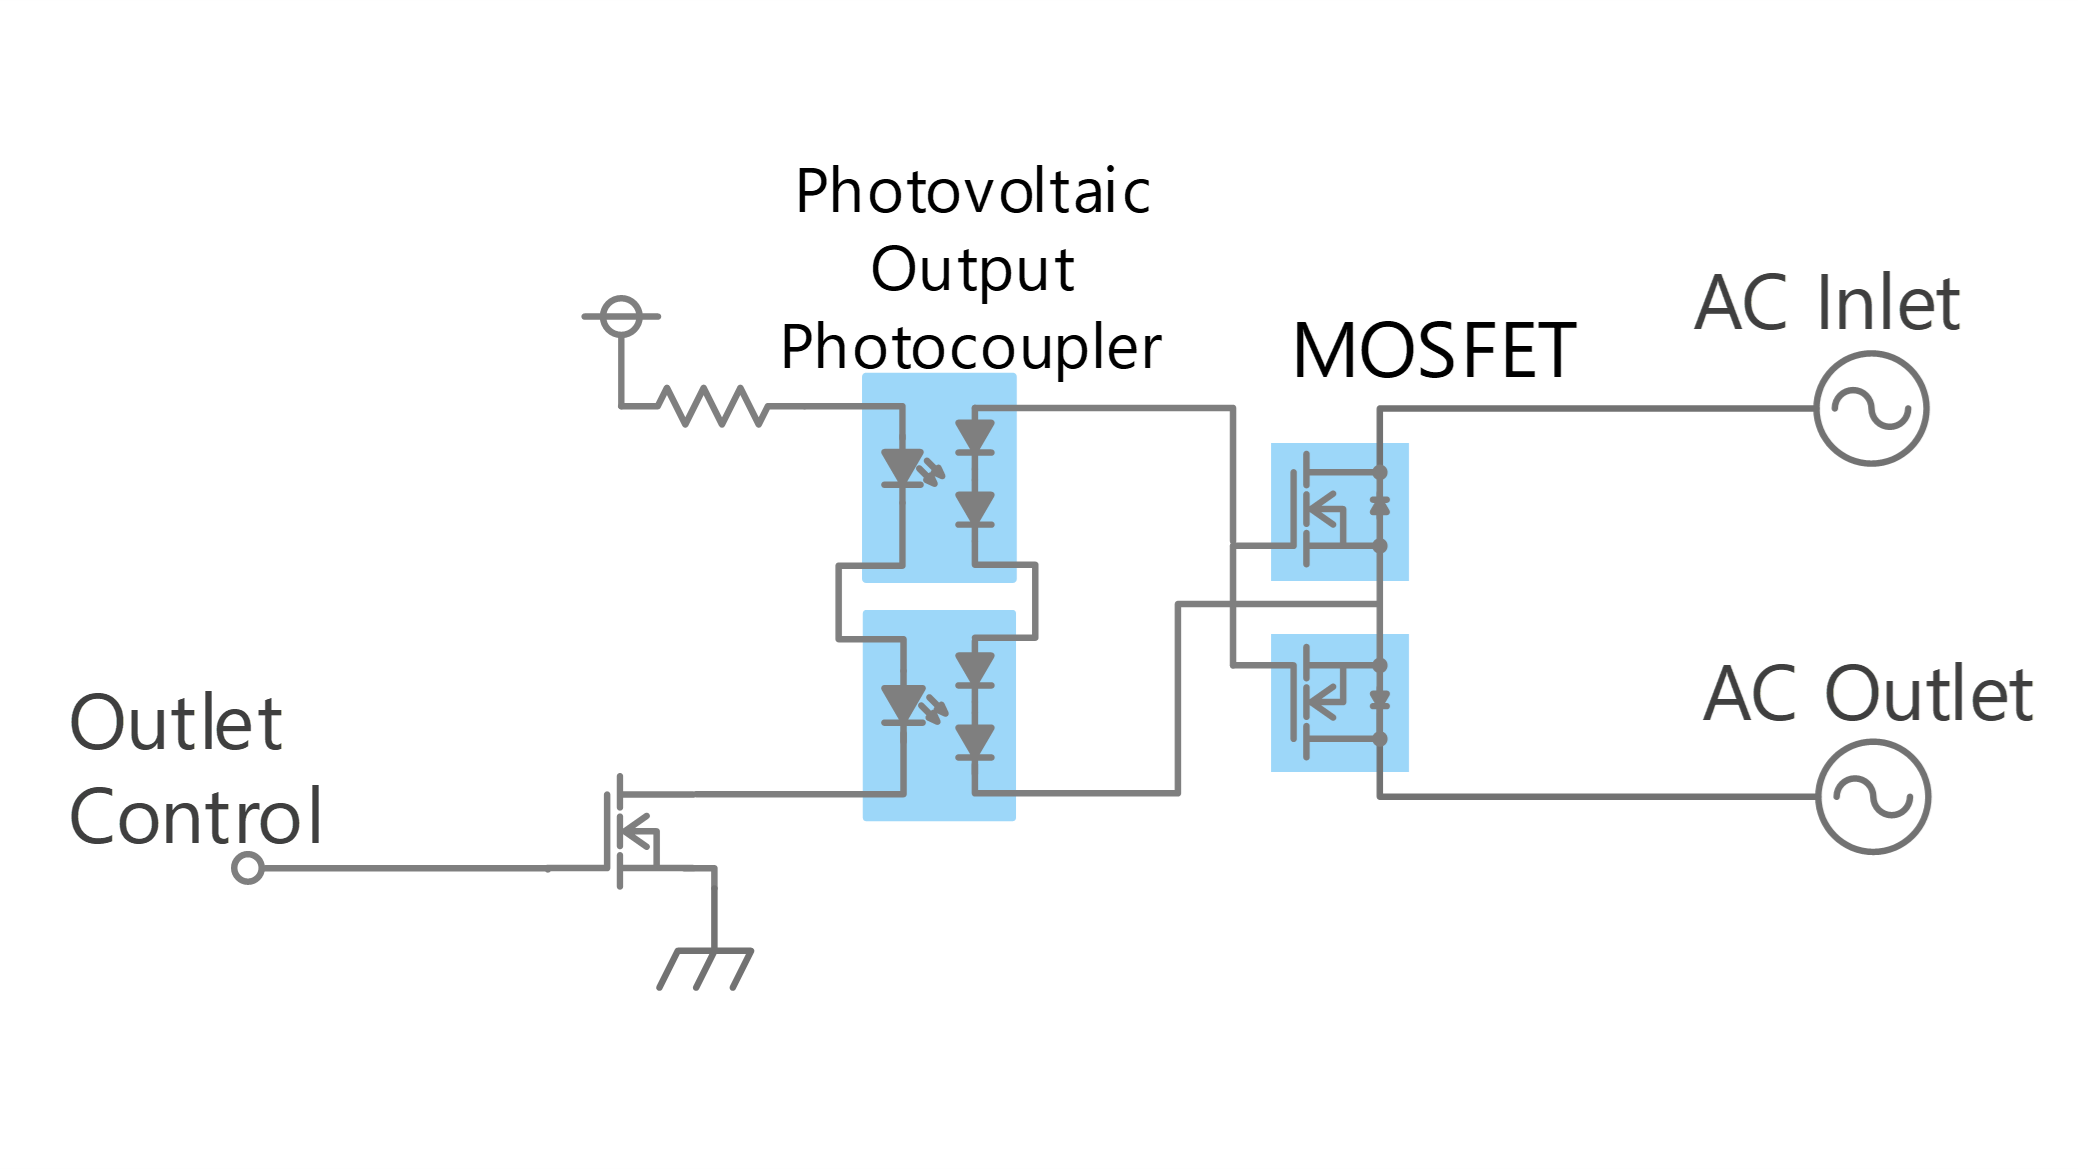 AC switch circuit using photovoltaic output photocouplers and MOSFETs (around 0.3 A to 1 A)